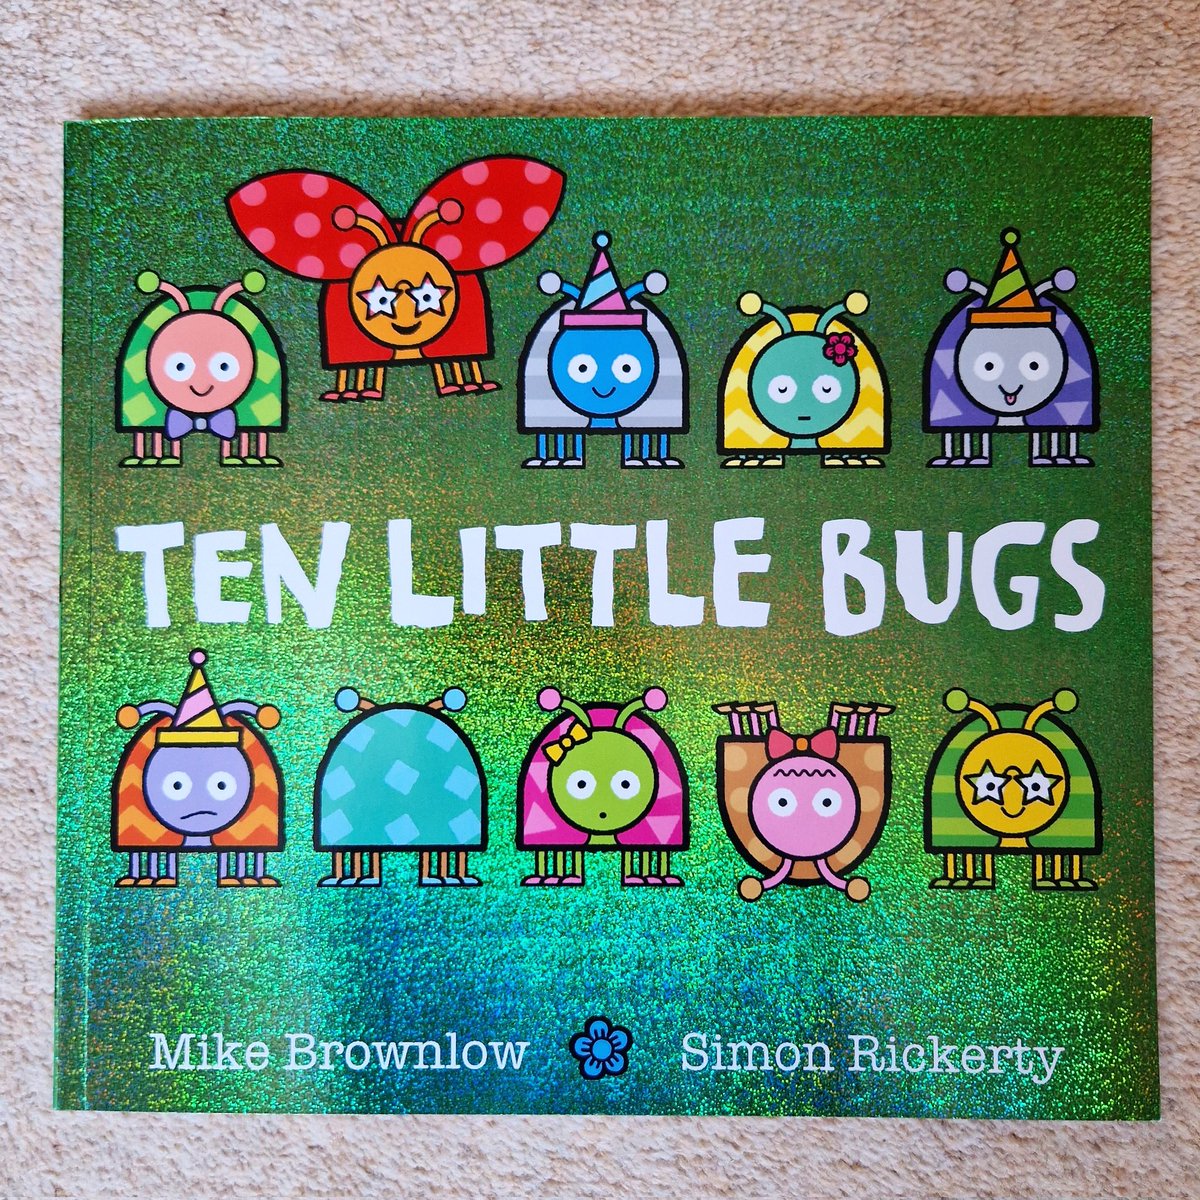 Paperback edition of Ten Little Bugs - out today! @MikeBrownlow1 @HachetteKids